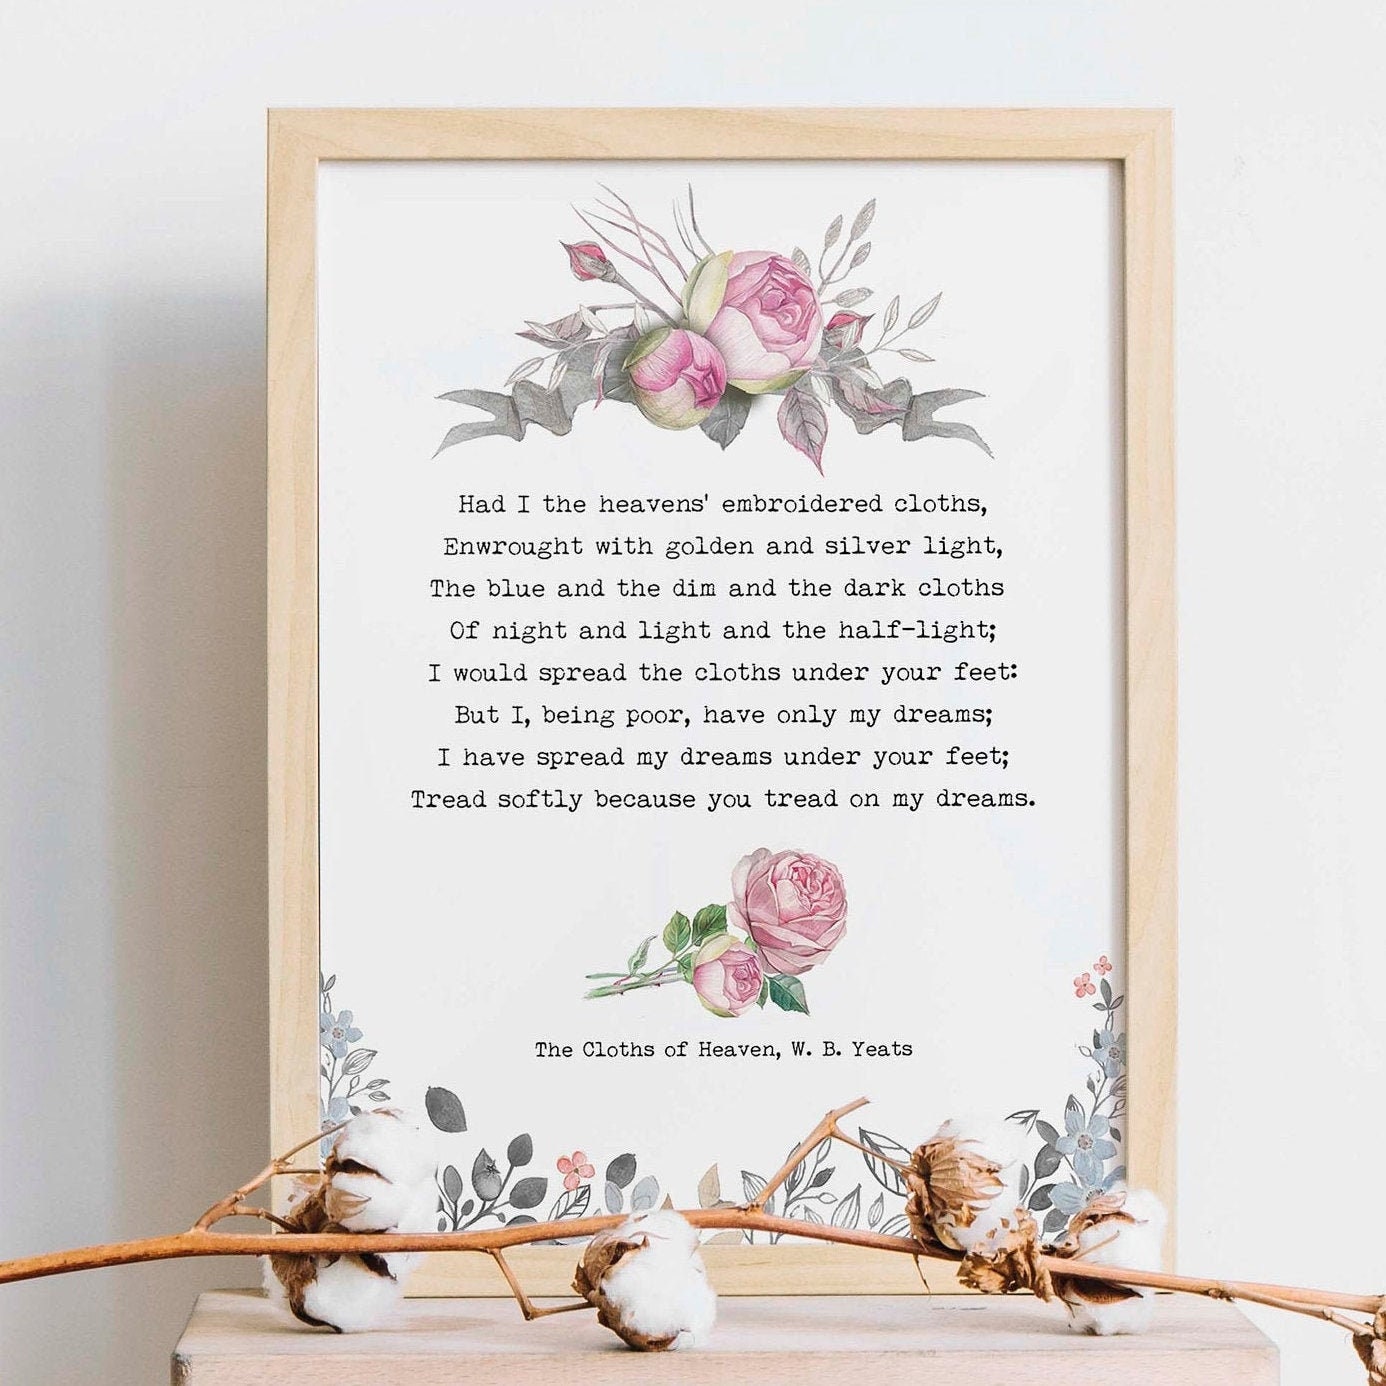 W.B. Yeats The Cloths Of Heaven Love Poem, Romantic Poem Art for Bedroom or Living Room Wall Decor